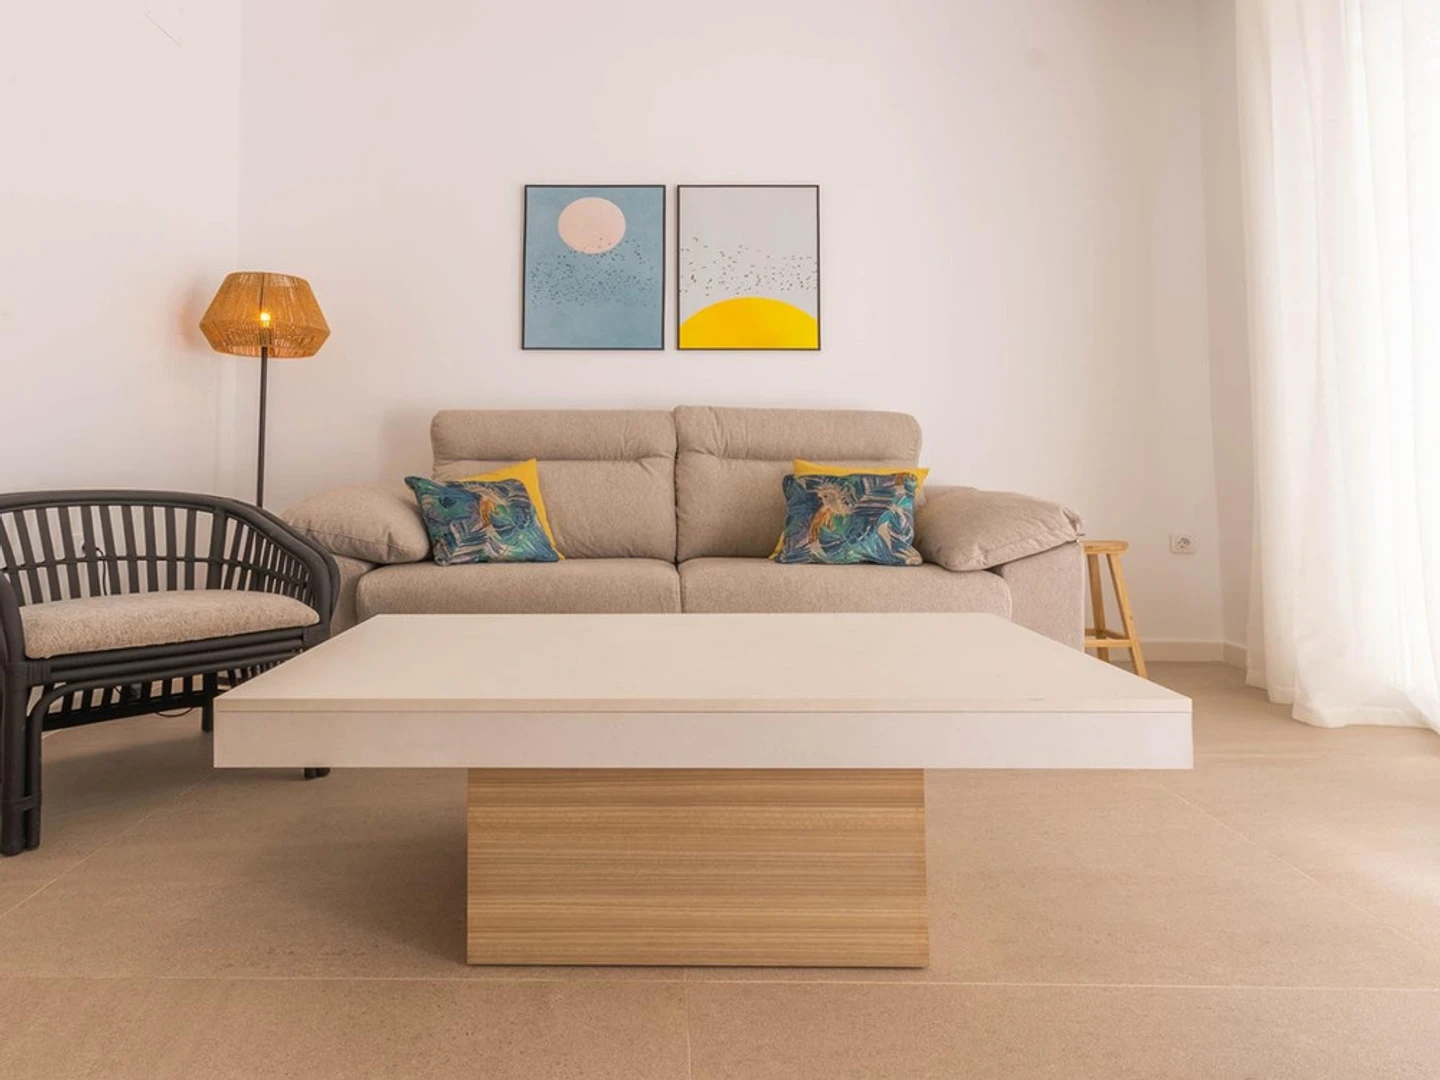 Two bedroom accommodation in Córdoba